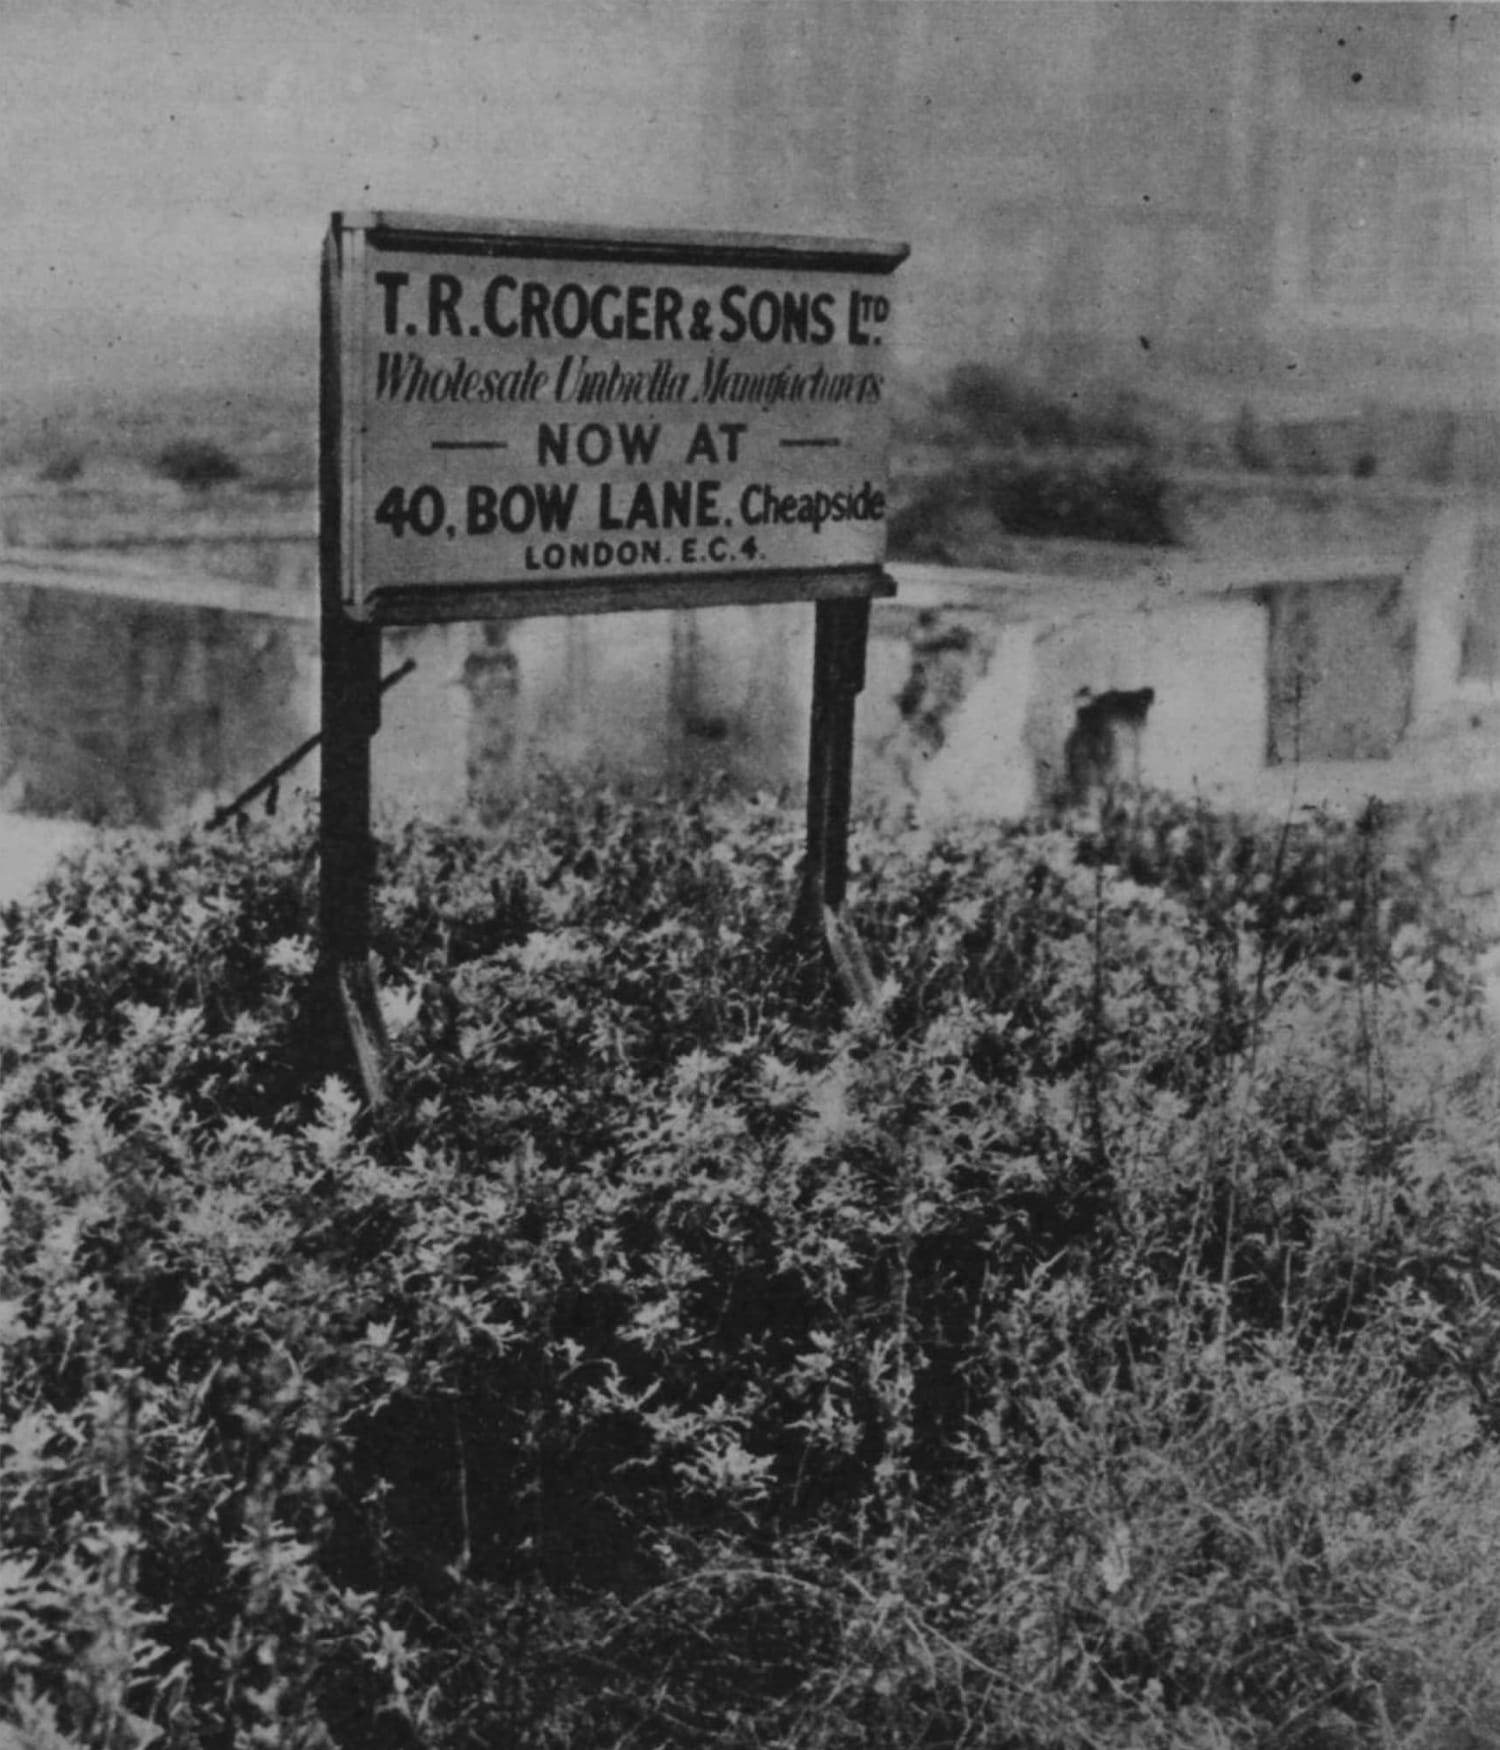 A sign mounted on two pillars that reach the ground in a clump of vegetation. The sign reads, "T.R. Croger & Sons Ltd. Wholesale Umbrella Manufacturers. Now at 40 Bow Lane, Cheapside, London EC4."